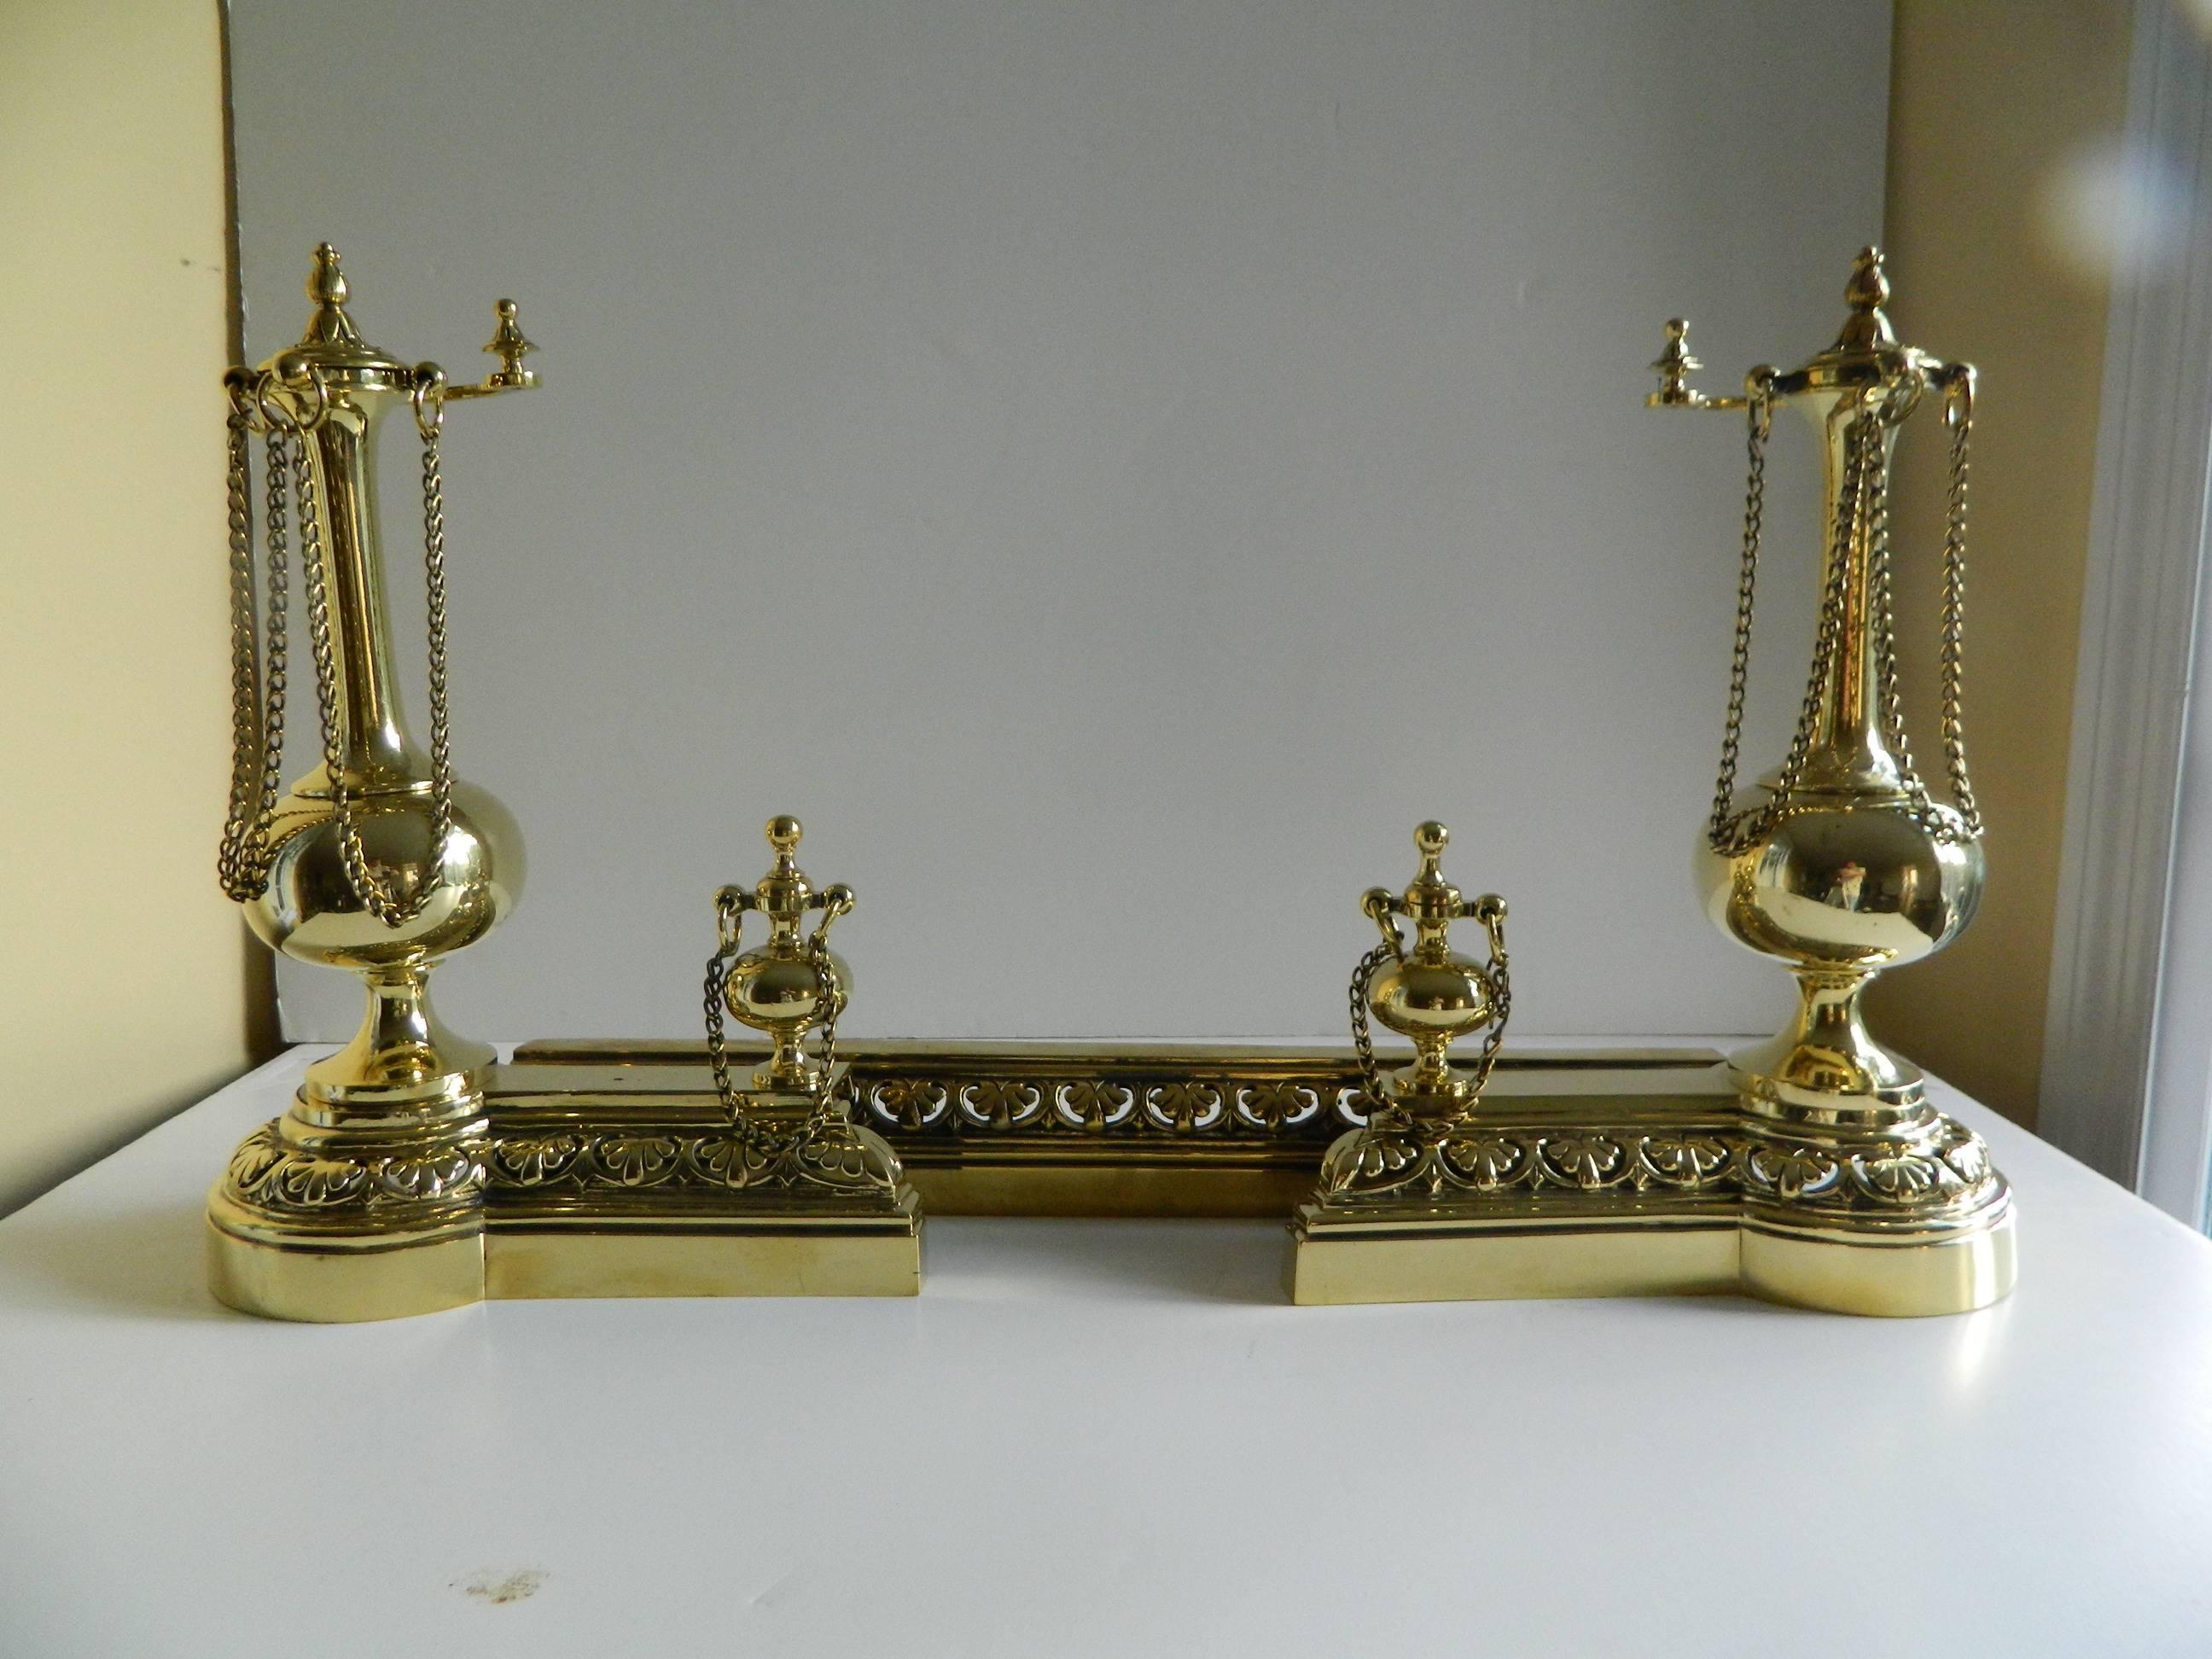 Pair of polished brass chenets or andirons with fender, 19th century.
 